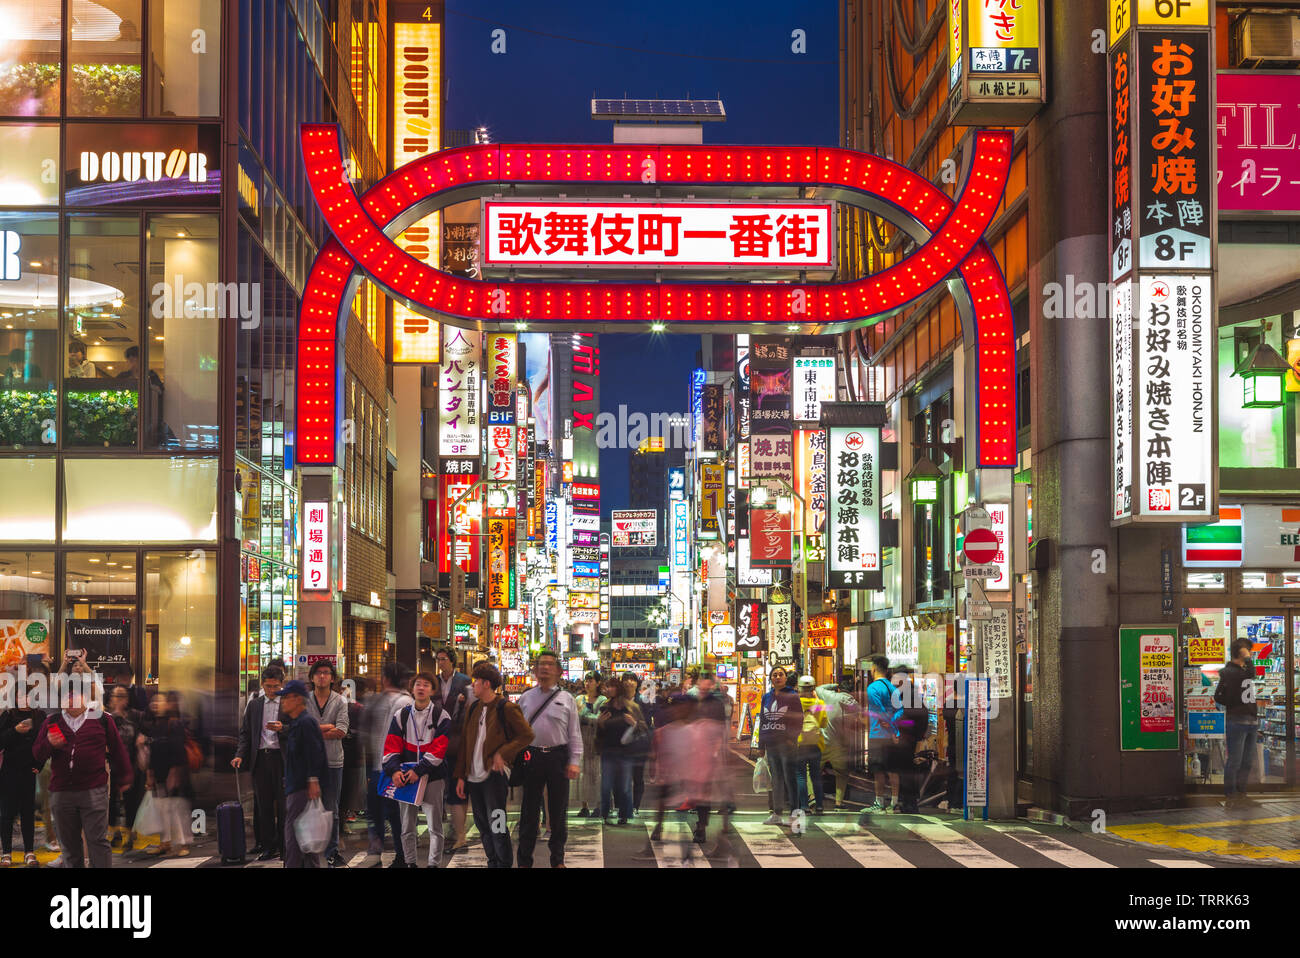 Tokyo, Japan - June 11, 2019: Kabukicho, sleepless town, red light district in Tokyo. The name comes from late-1940s plans to build a kabuki theater. Stock Photo